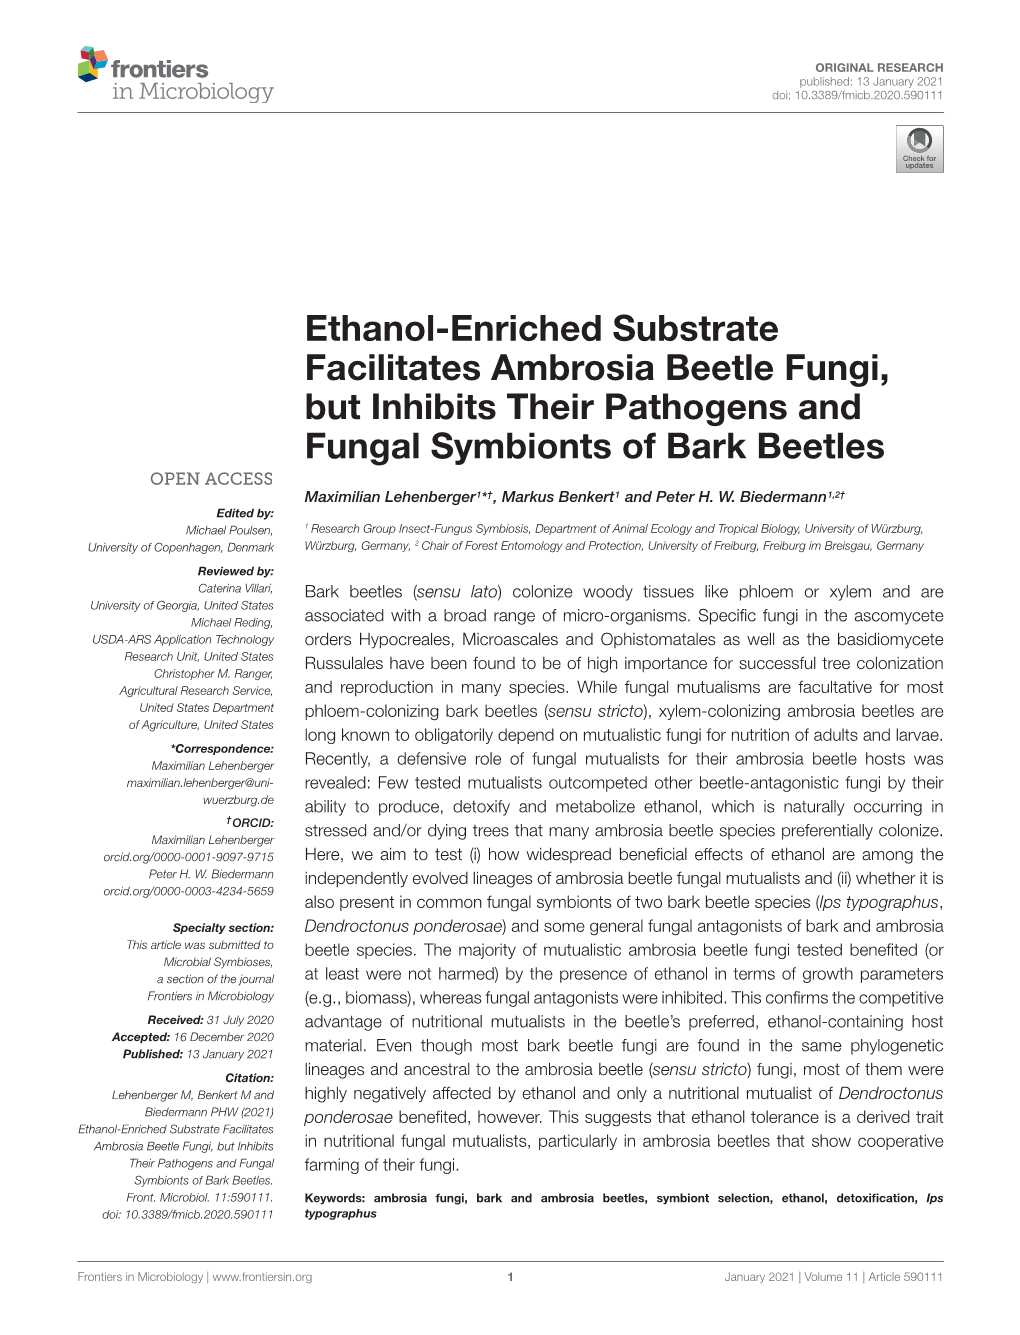 Ethanol-Enriched Substrate Facilitates Ambrosia Beetle Fungi, but Inhibits Their Pathogens and Fungal Symbionts of Bark Beetles